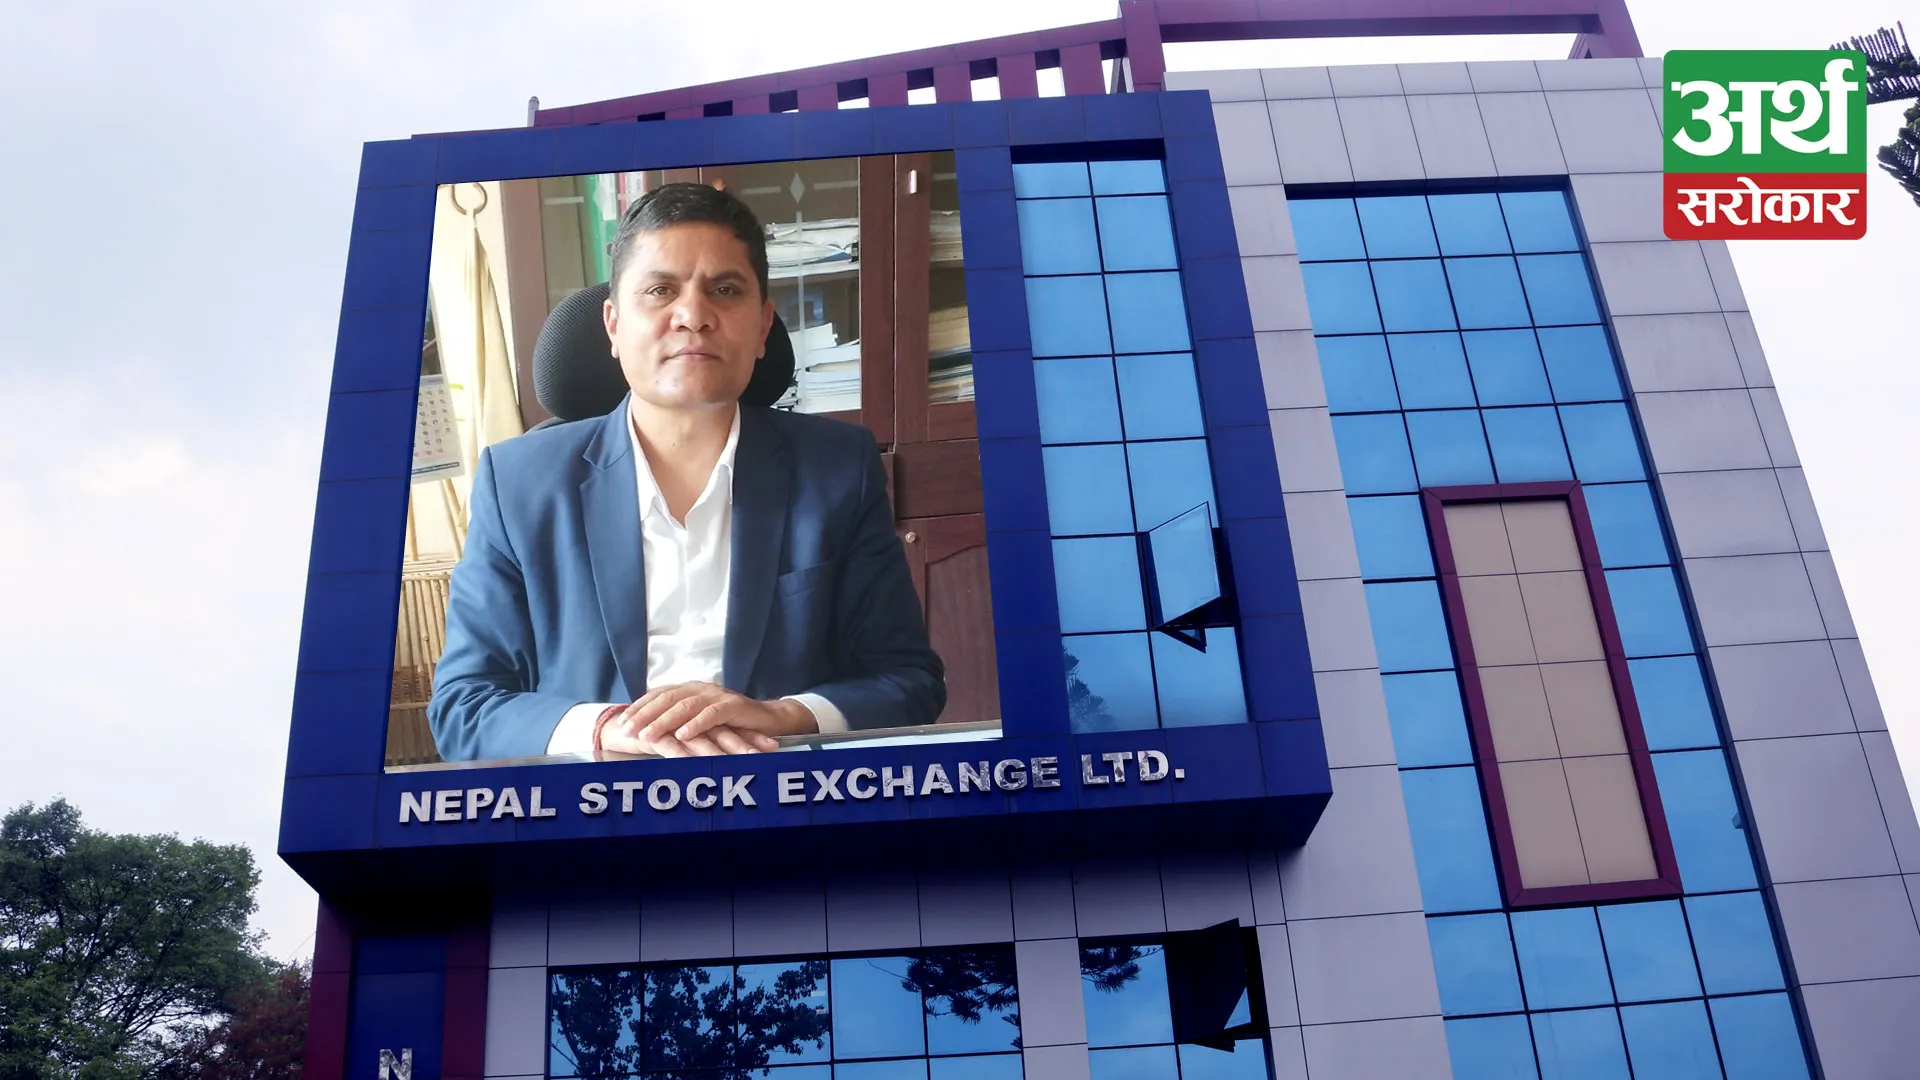 Shobhakant Paudel appointed as the chairman of NEPSE